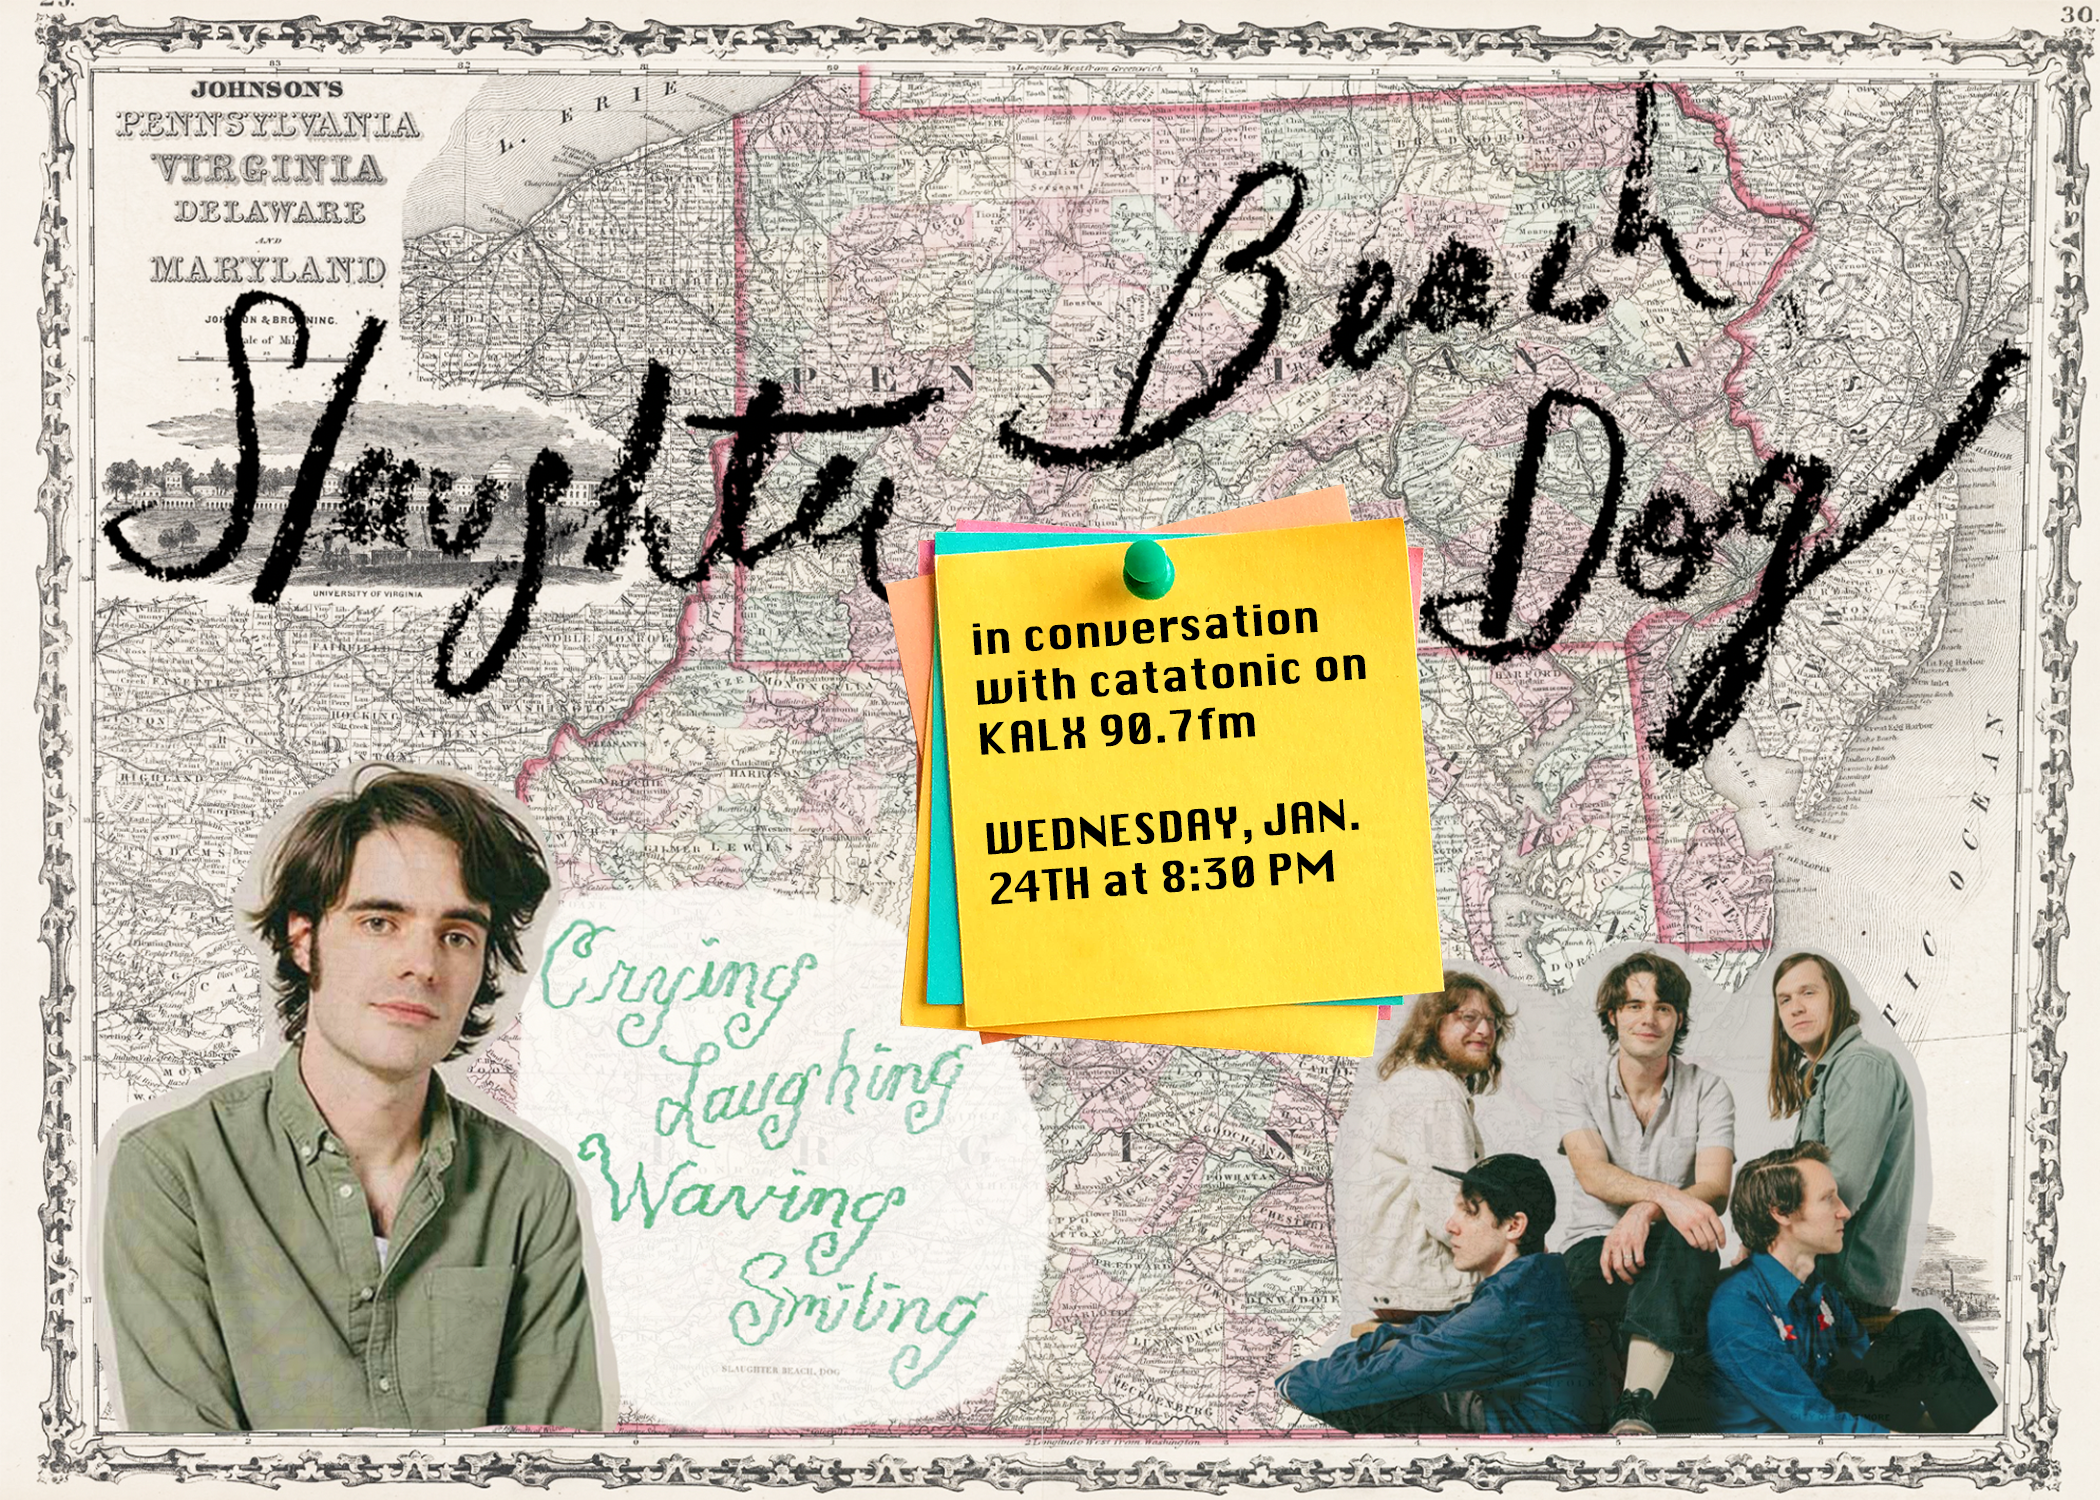 Members of the band, Slaughter Beach, Dog, superimposed over a map illustration.